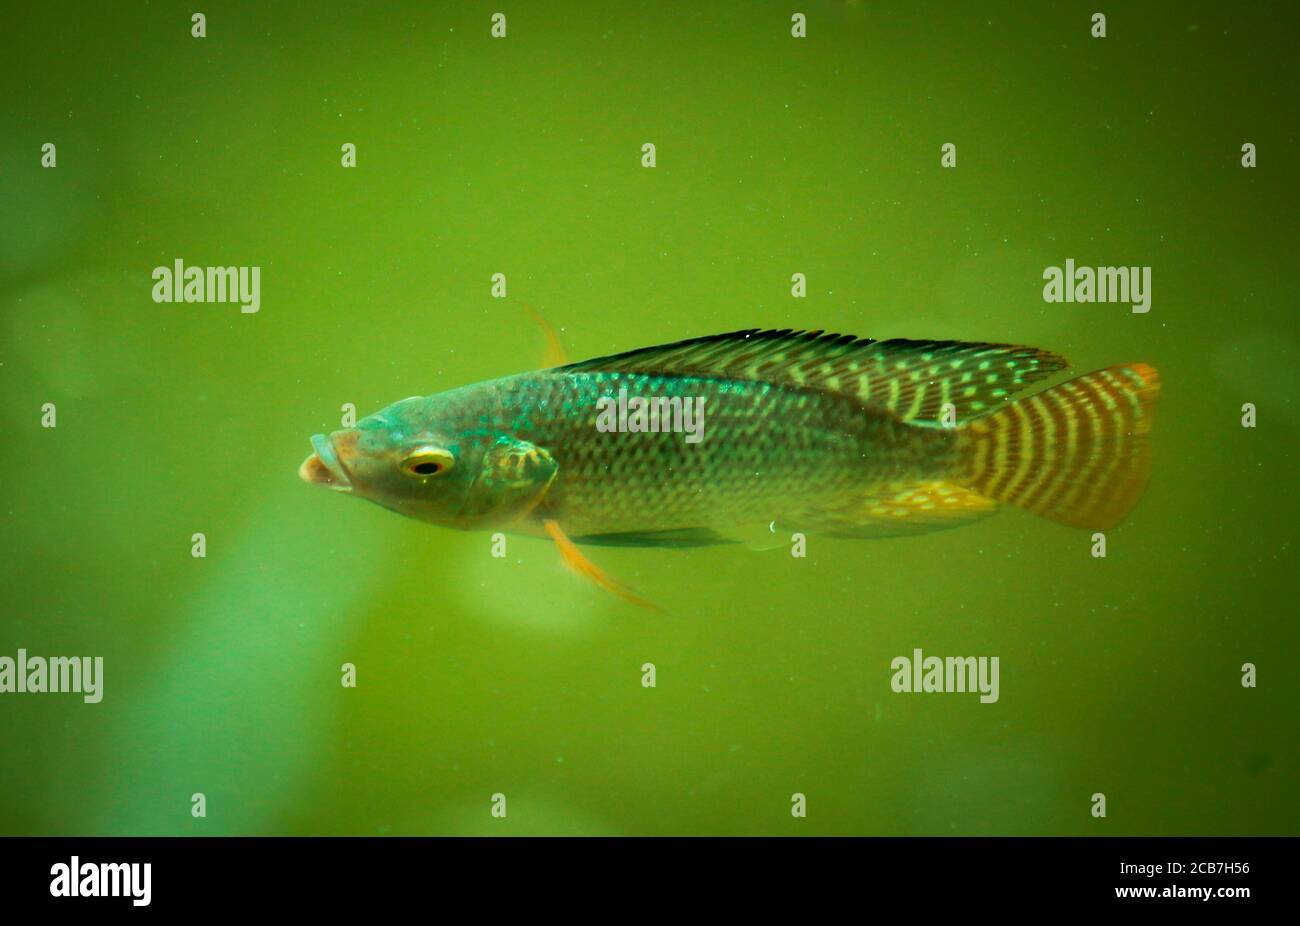 Green Tilapia fish swimming in a pond Stock Photo